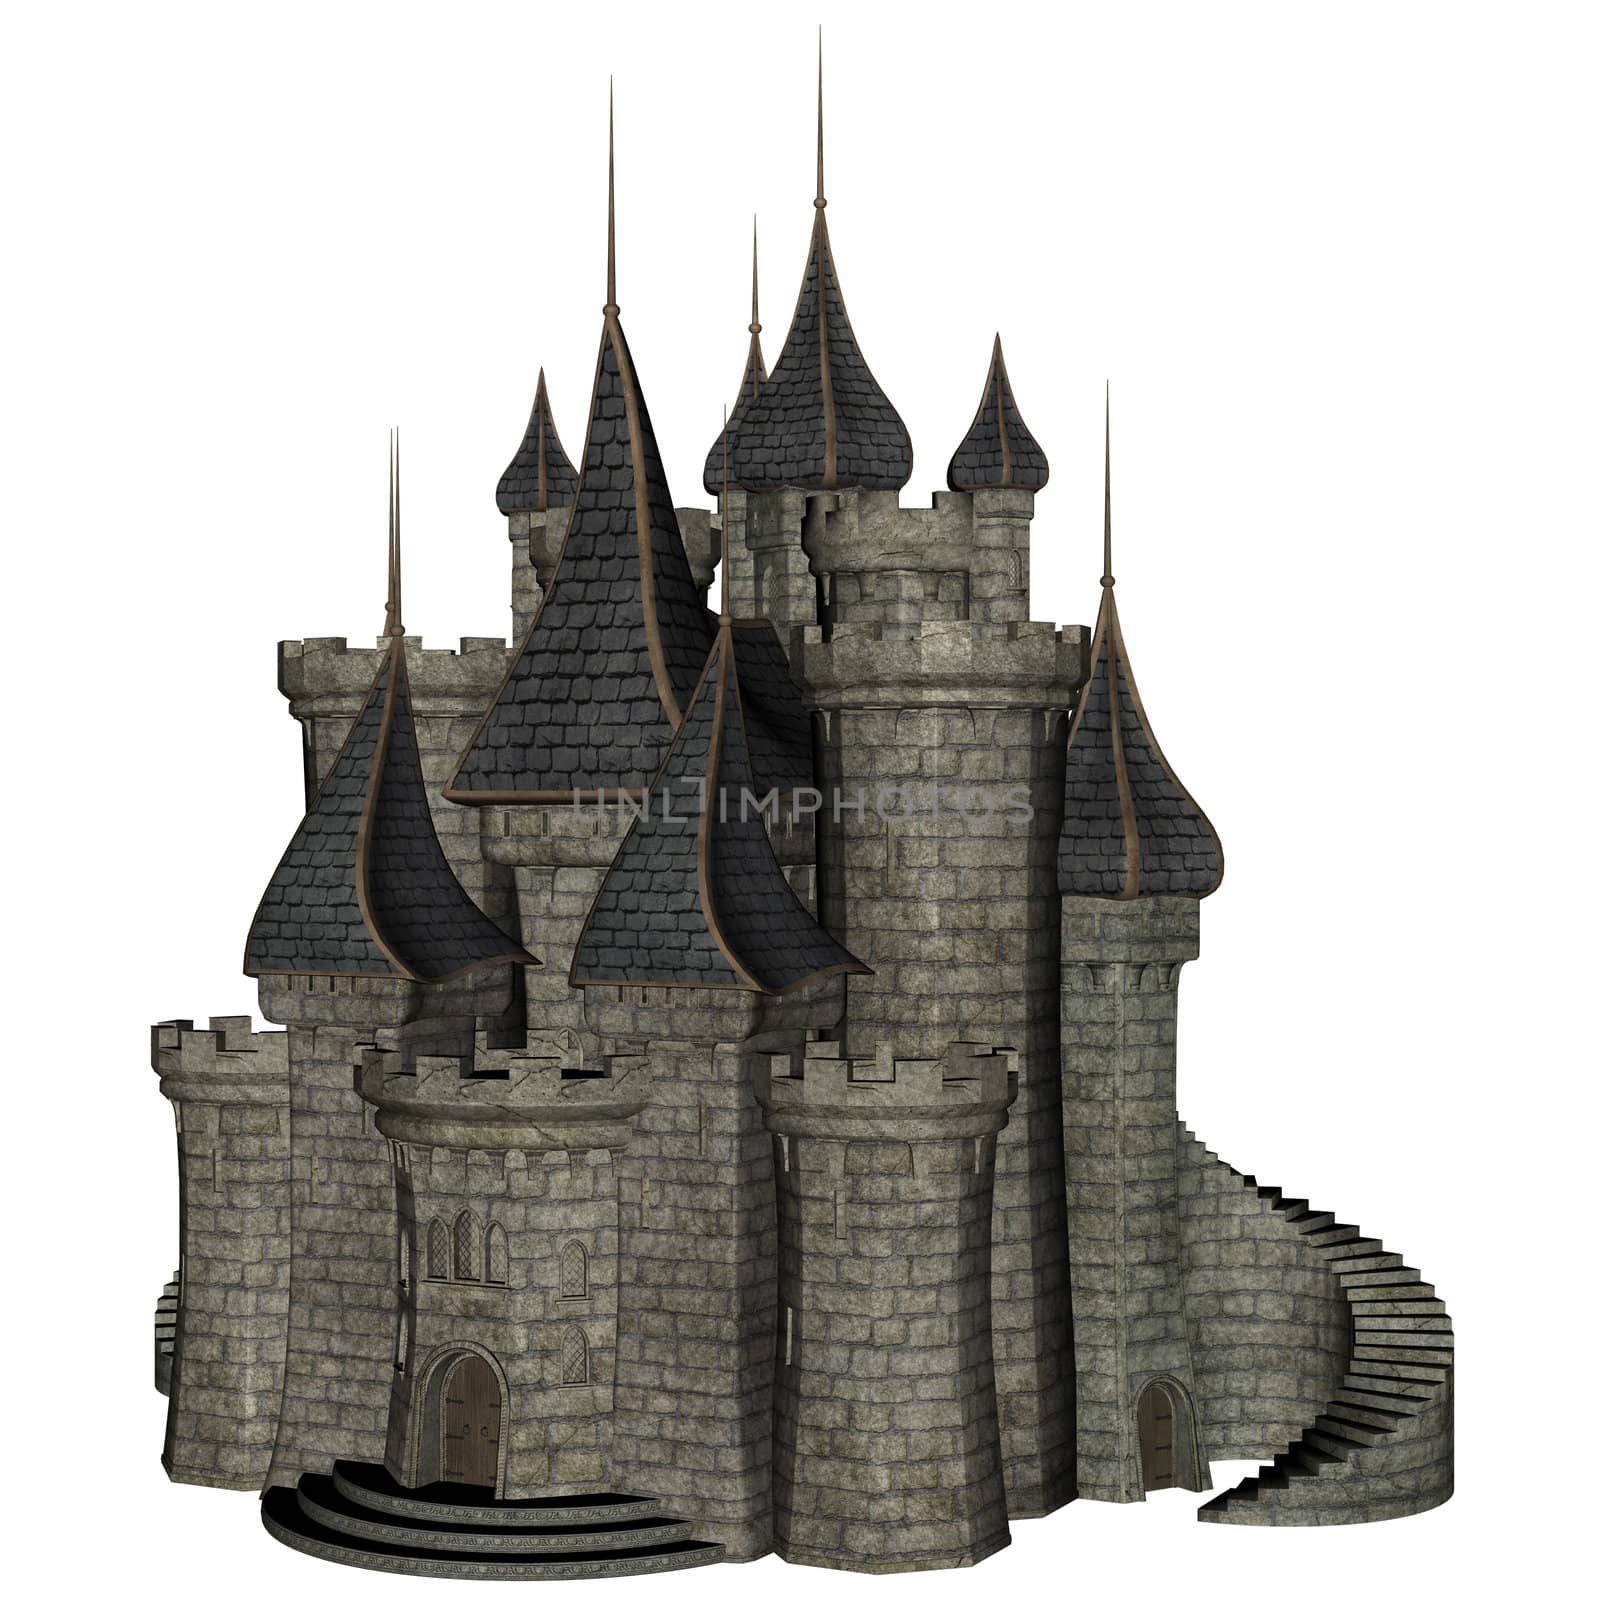 3D rendered illustration of fantasy castle on white background isolated